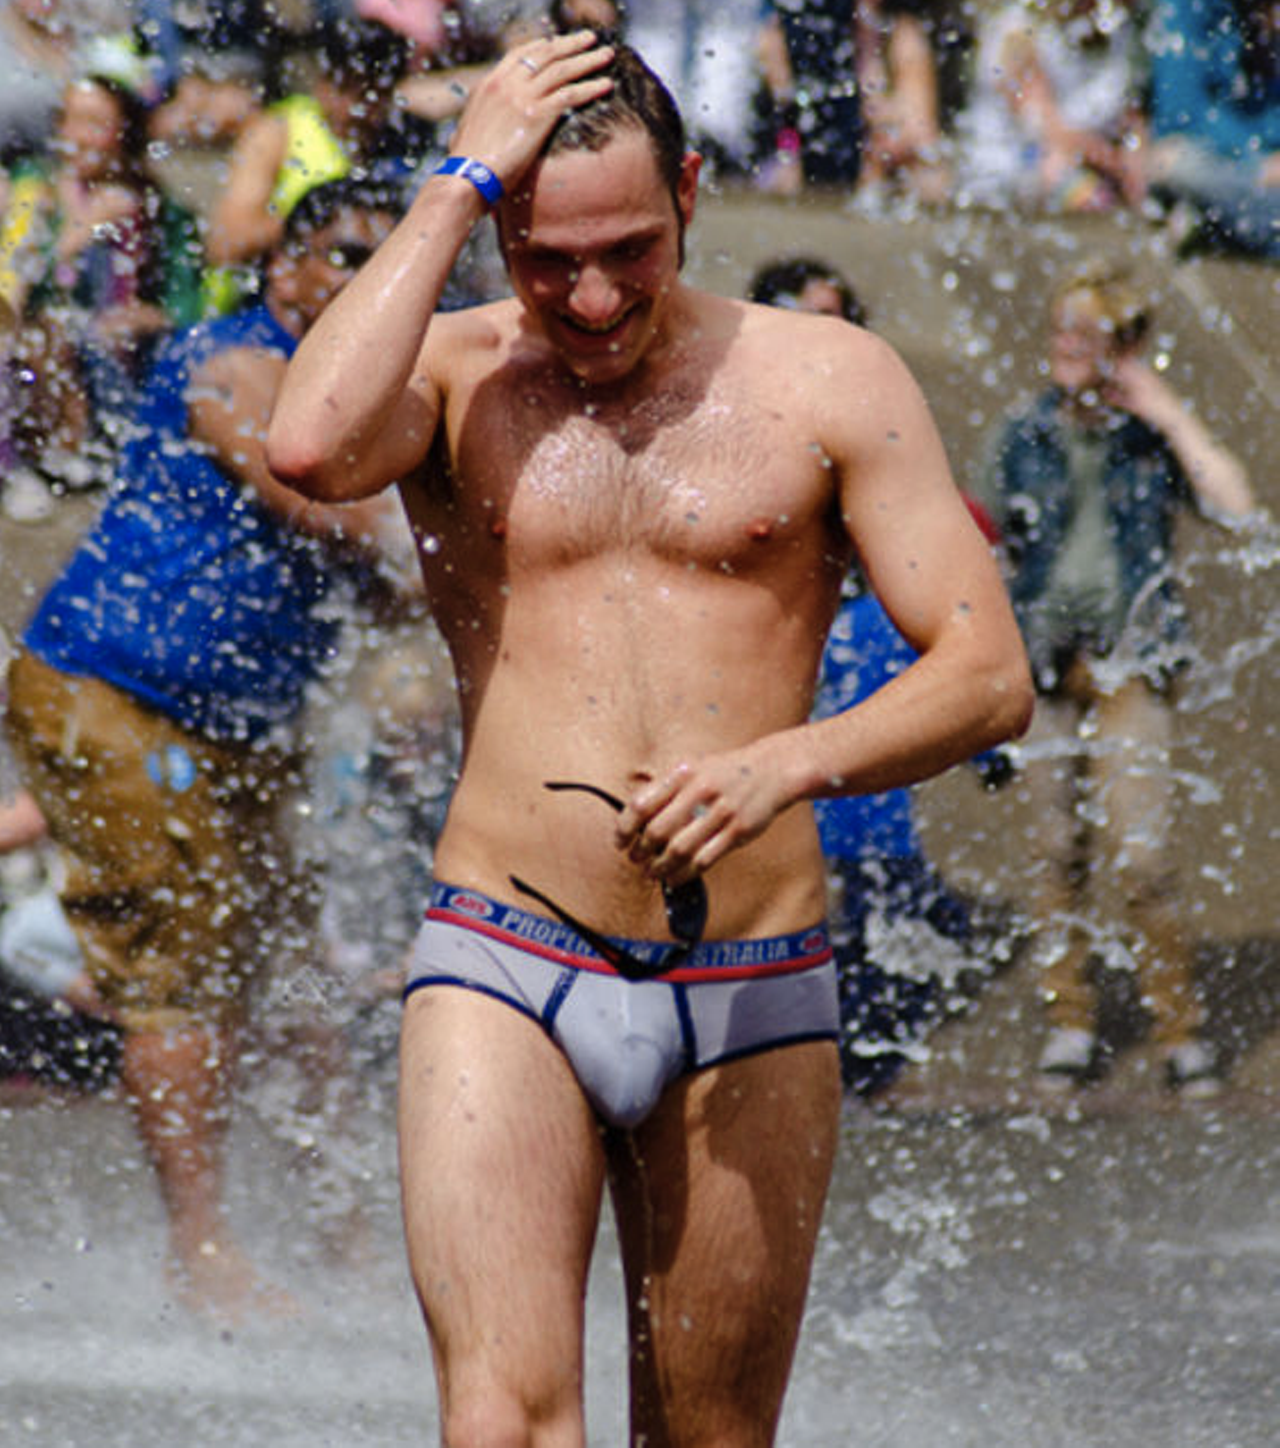 Cooling off at pride in Seattle, Washington.